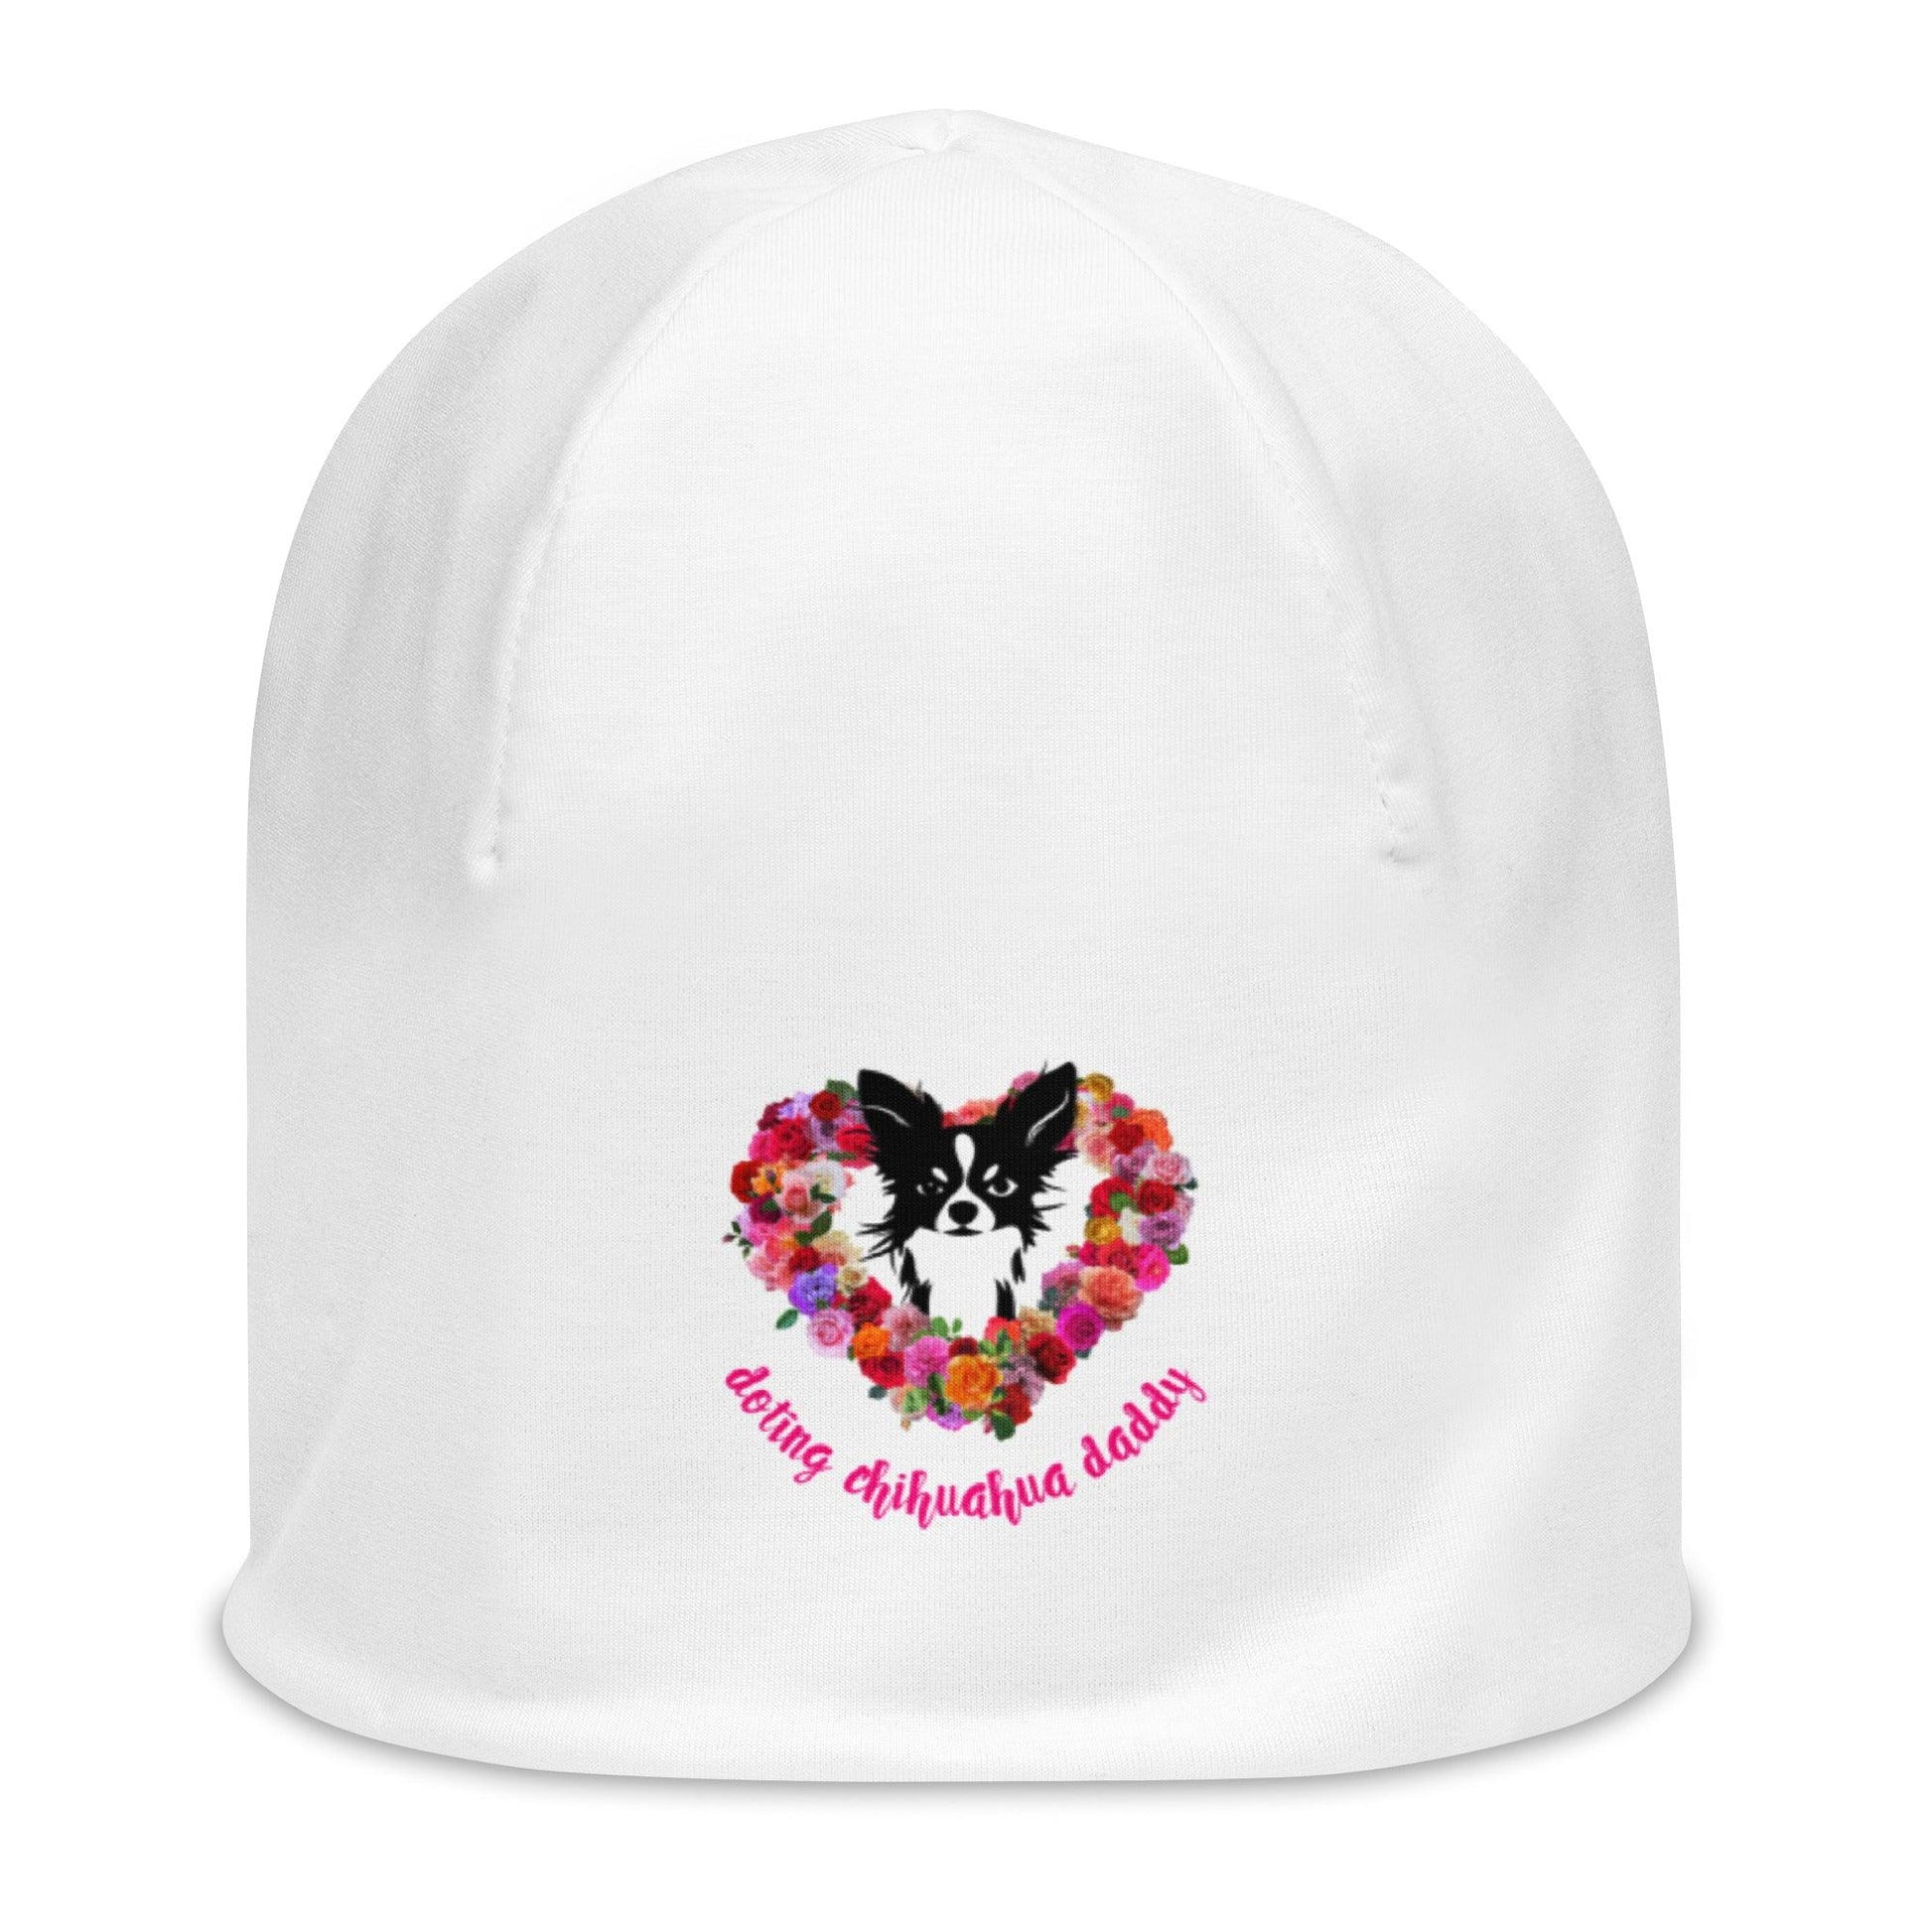 Real men love chihuahuas. Chihuahua daddies are sexy! Forget guns and roses; Chimigos gives you a chihuahua and roses. Divine. Adorable. Slay. SEXY! This soft and comfy chihuahua and roses love heart white beanie makes the perfect Father's Day / birthday / Christmas gift for a doting chihuahua daddy. Design by Renate Kriegler for Chimigos.